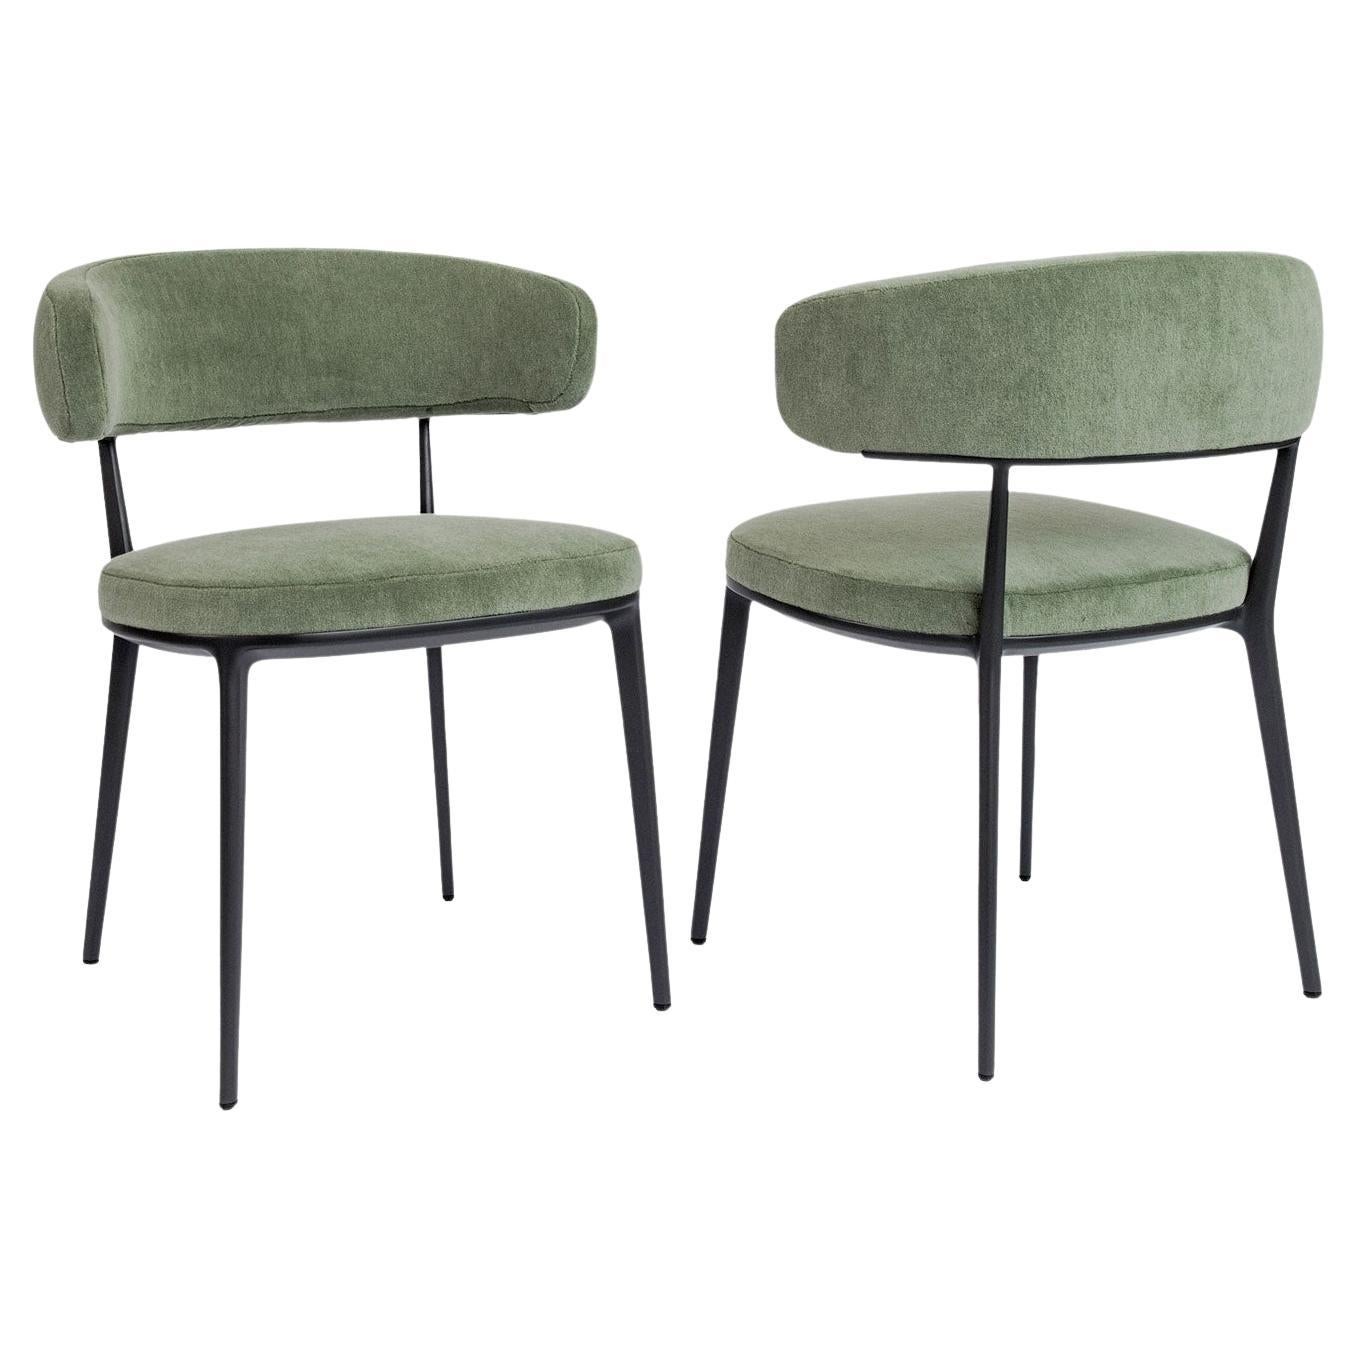 Caratos Dining Chairs in Sage-colored Velvet by Maxalto - Available Now For Sale